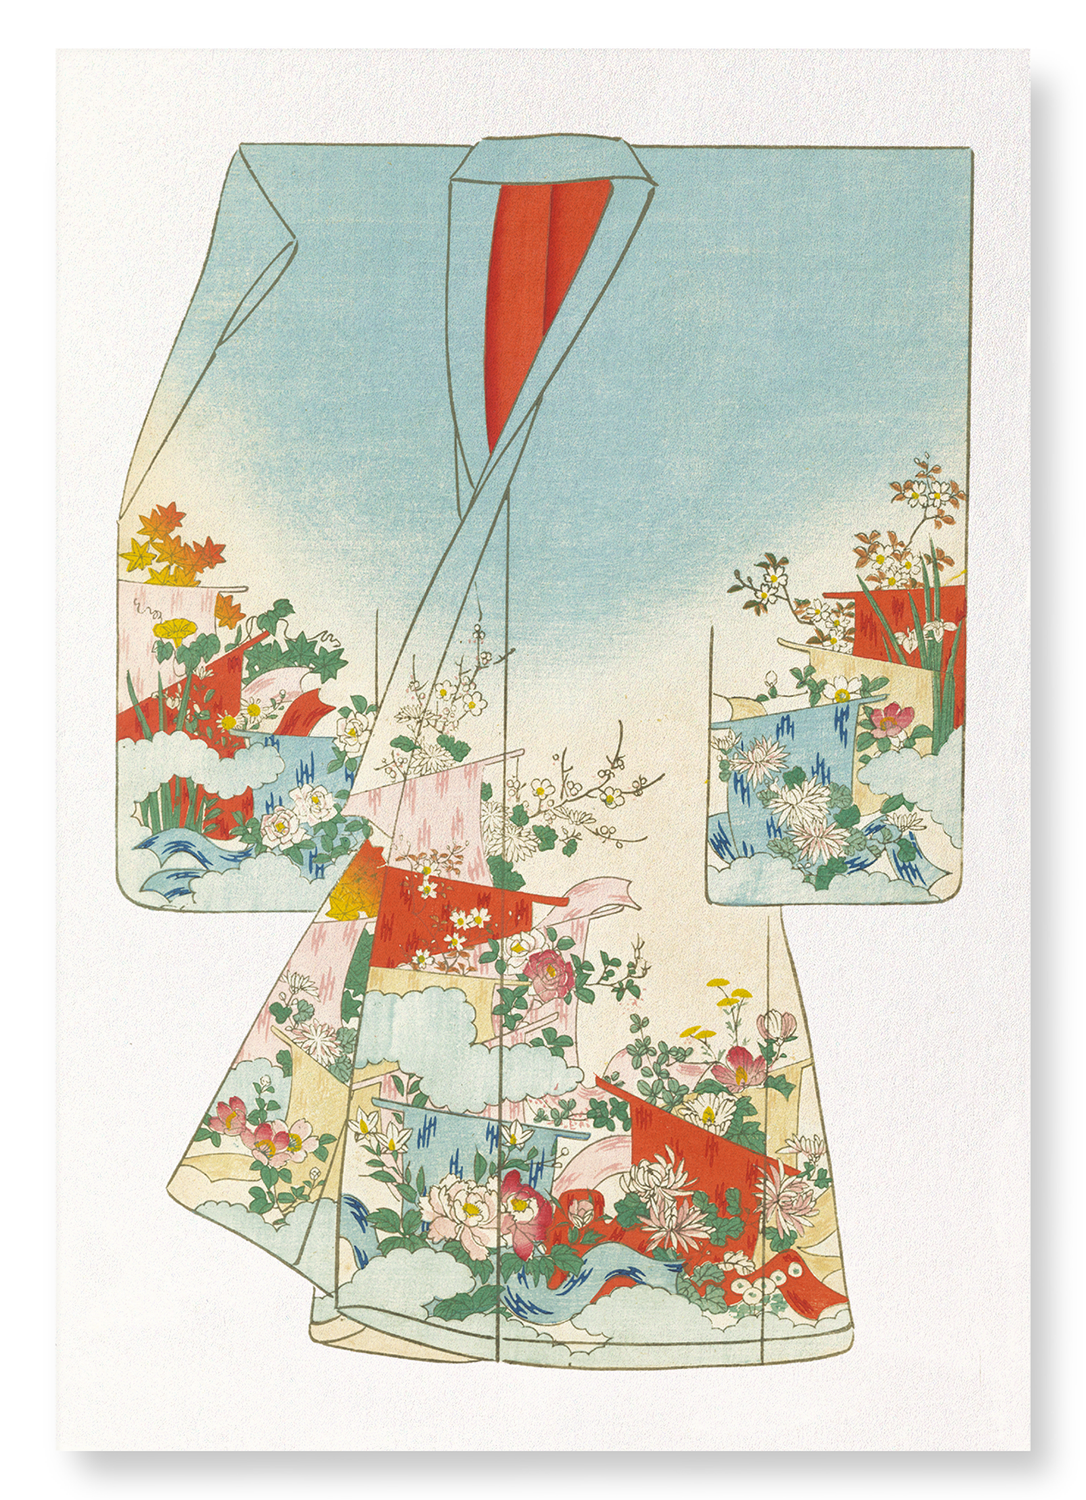 KIMONO OF FLOWERS AND PARTITIONS (1899)